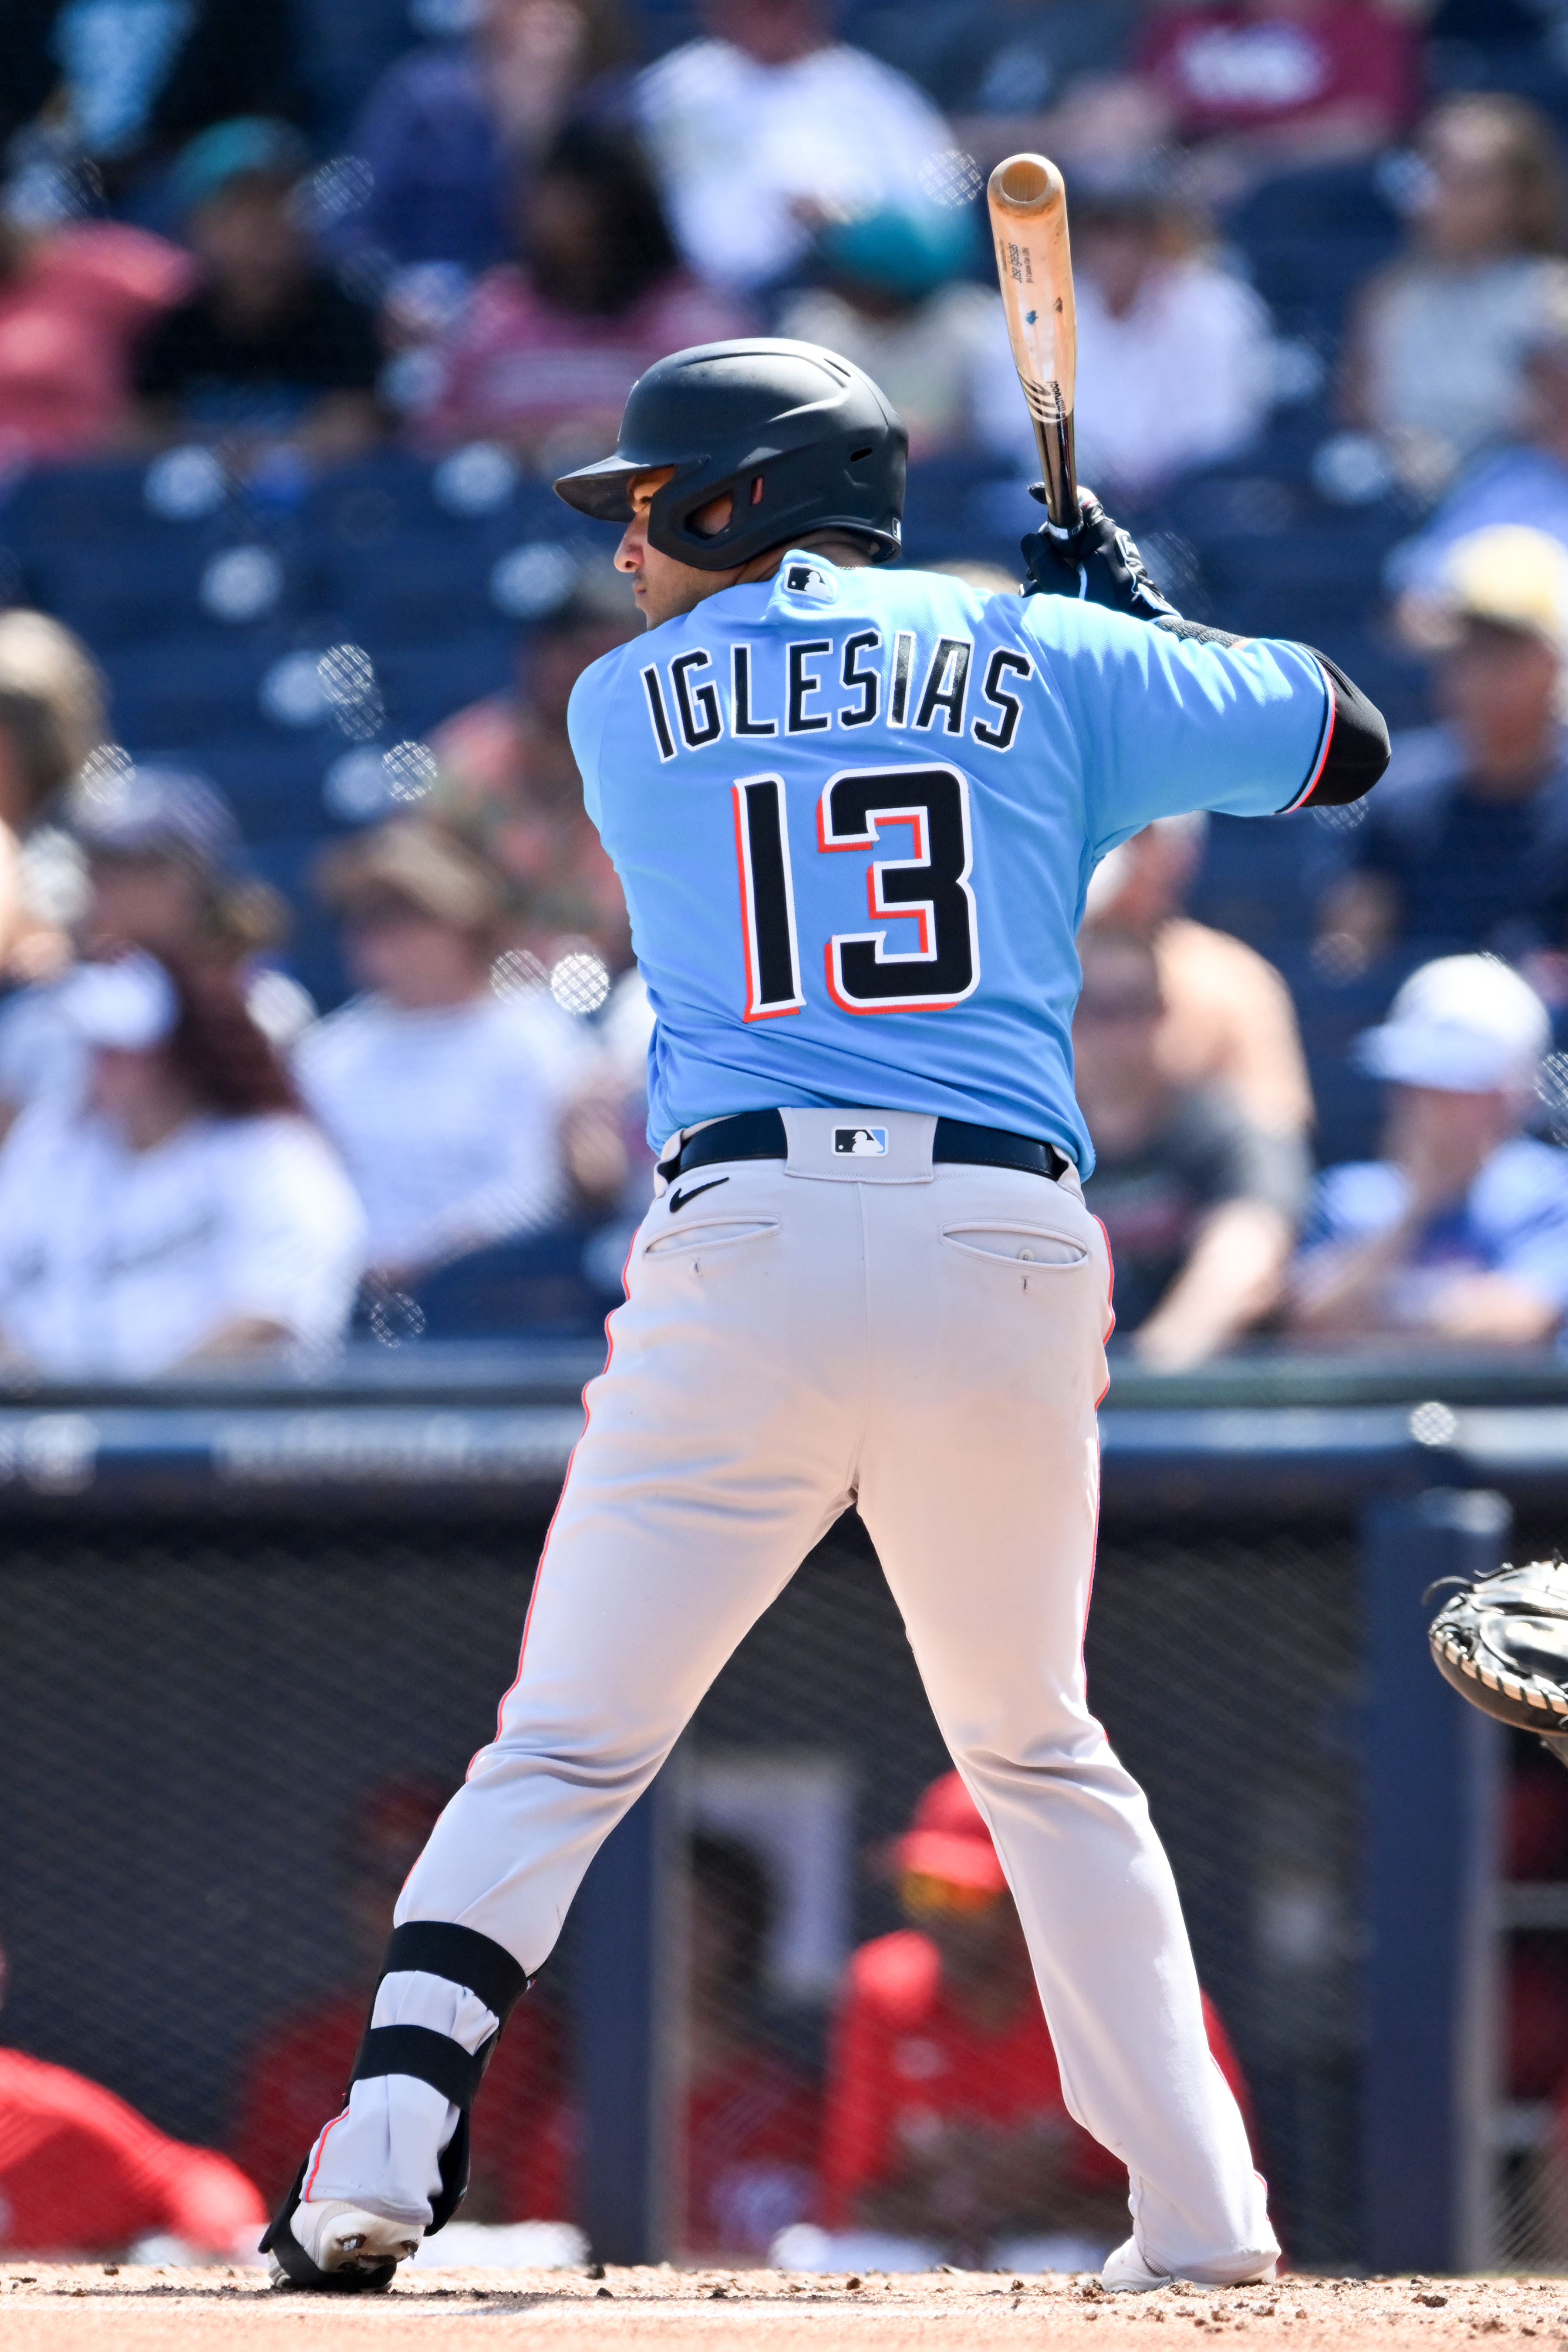 José Iglesias #13 of the Miami Marlins bats during the second inning of a spring training game against the Washington Nationals at The Ballpark of the Palm Beaches on March 18, 2023 in West Palm Beach, Florida.